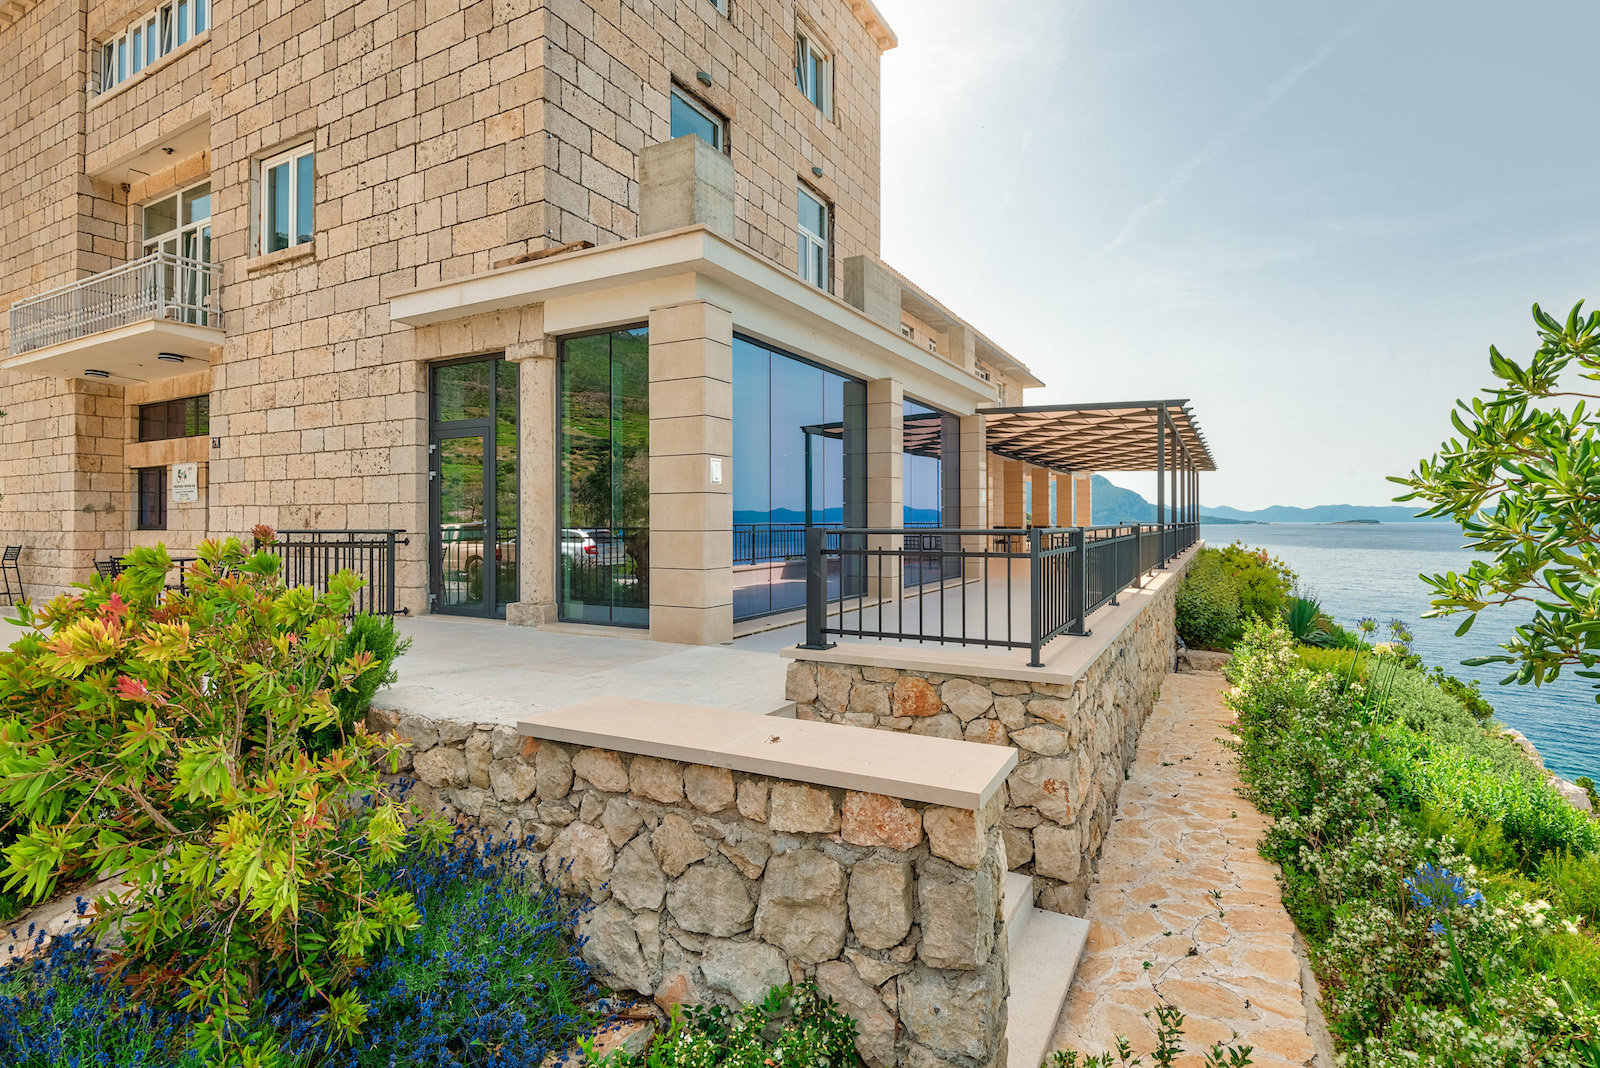 Image of exterior design of a Grgić Winery overlooking the Adriatic sea